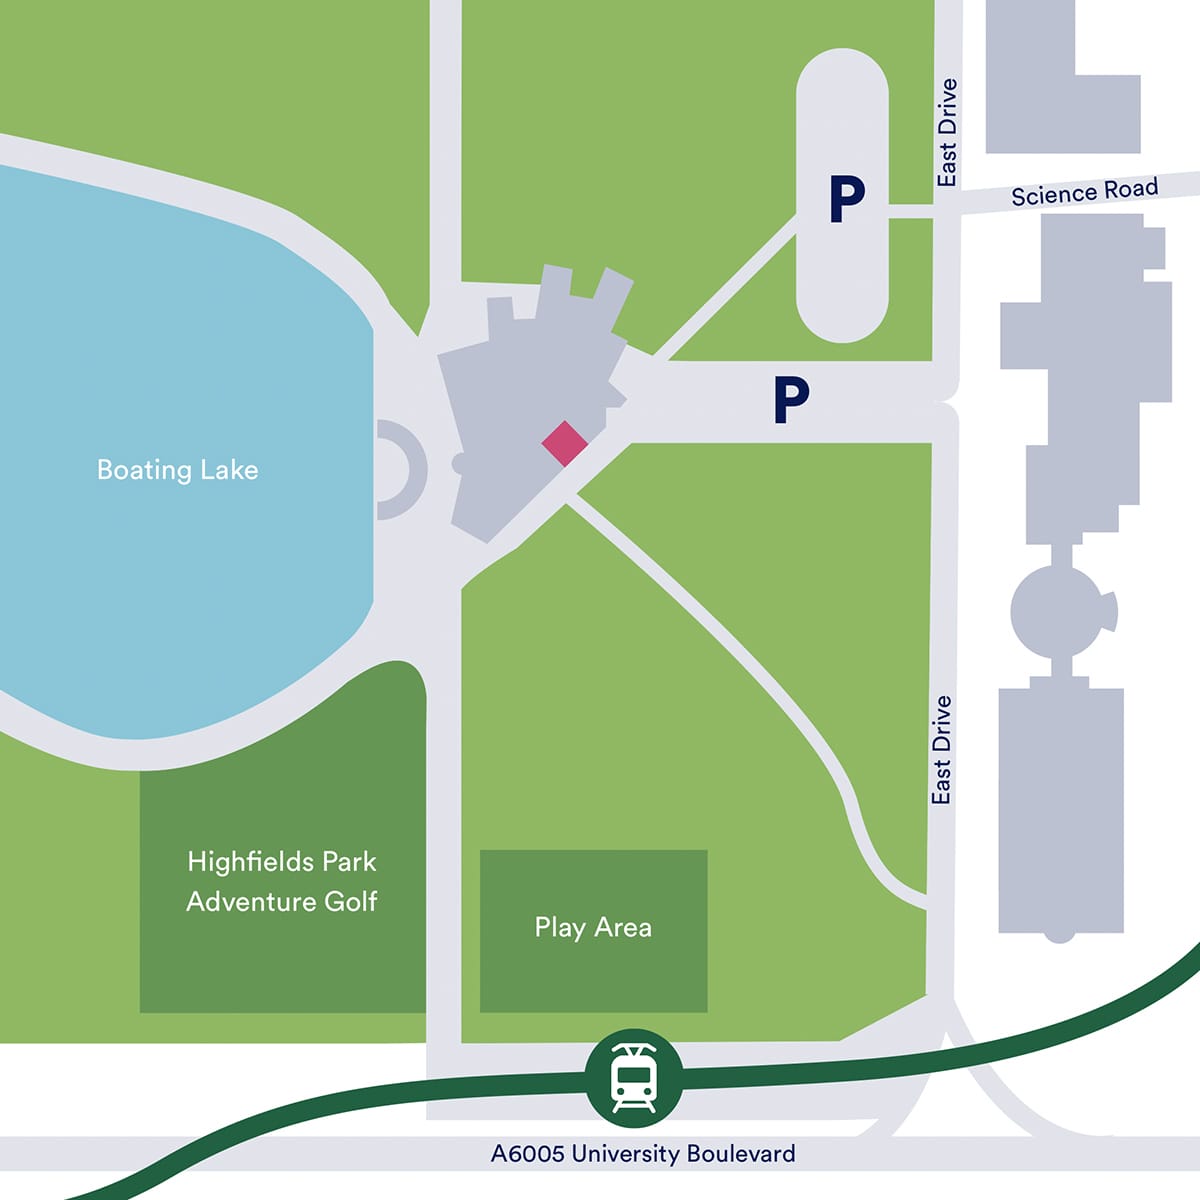 A map showing where the Wallner Gallery is located in relation to Lakeside Arts' buildings and the surrounding parkland.